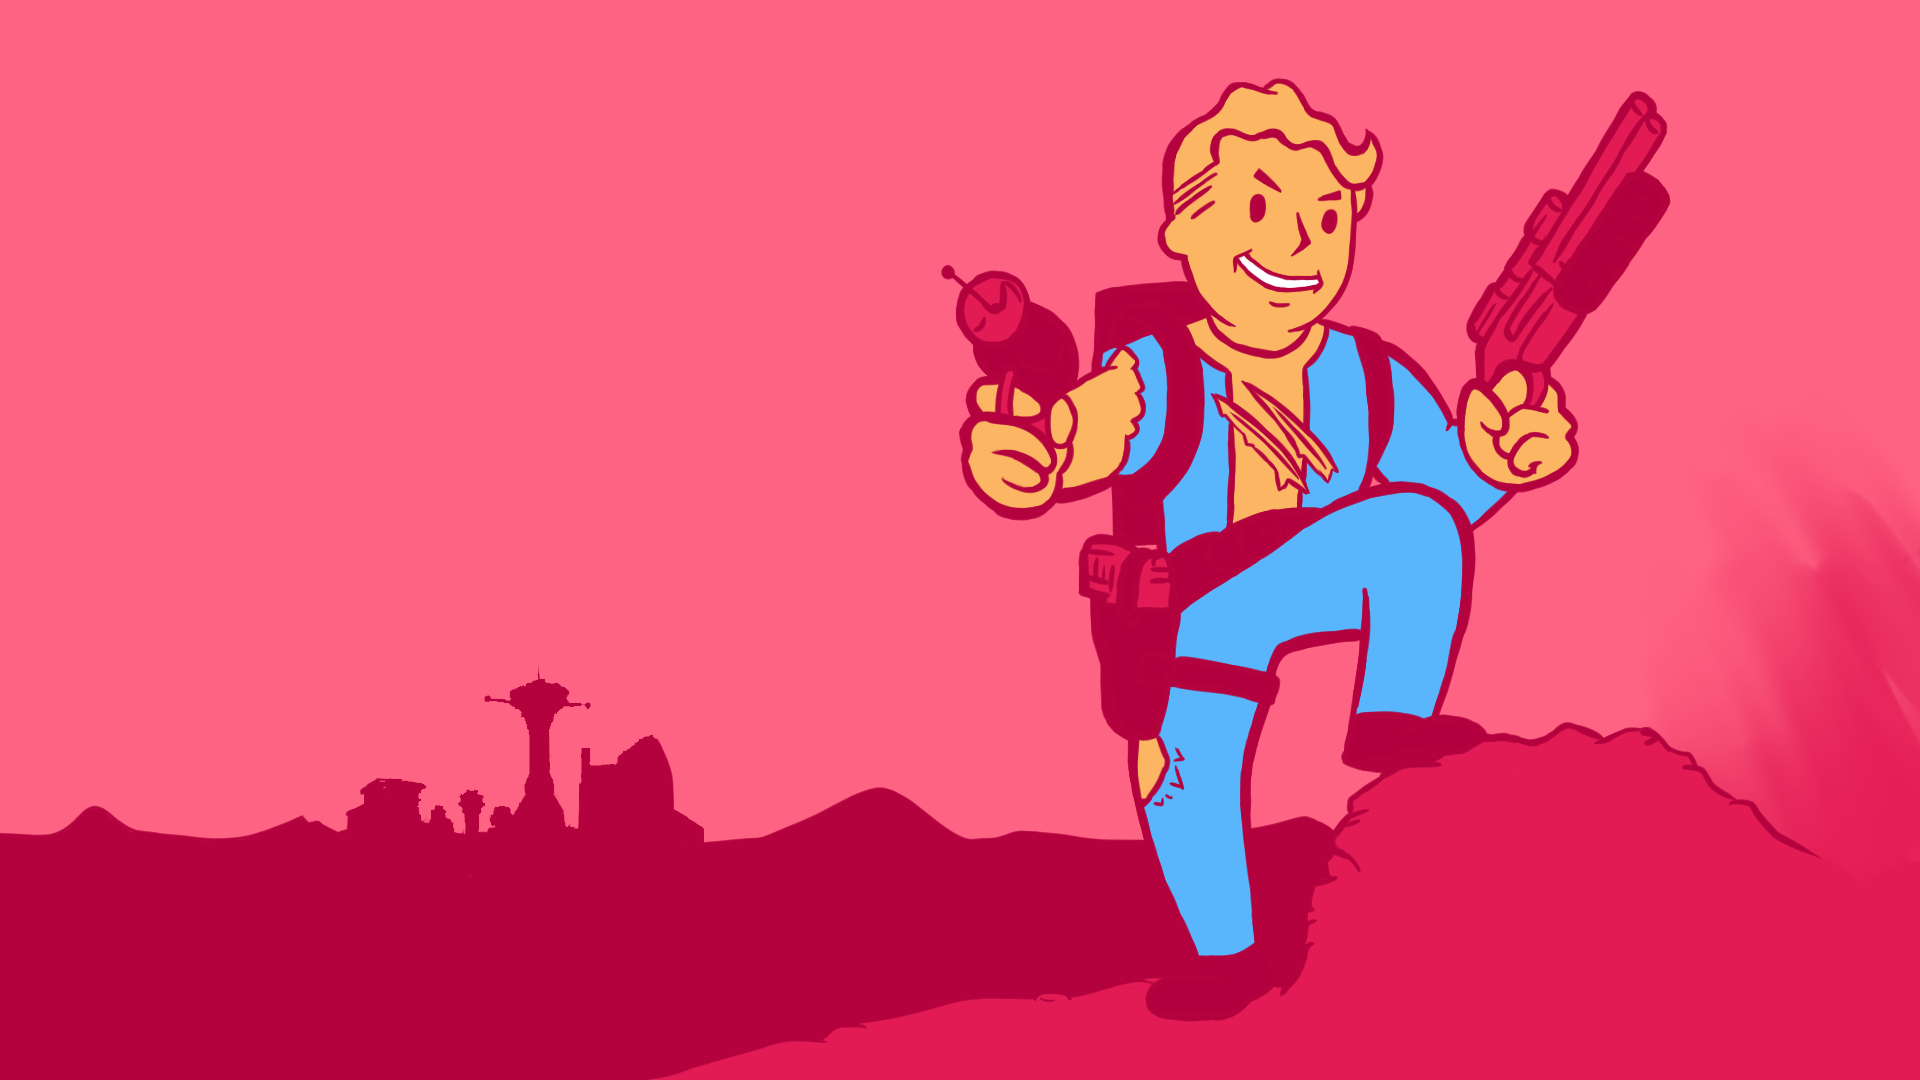 Video Game Fallout: New Vegas HD Wallpaper | Background Image